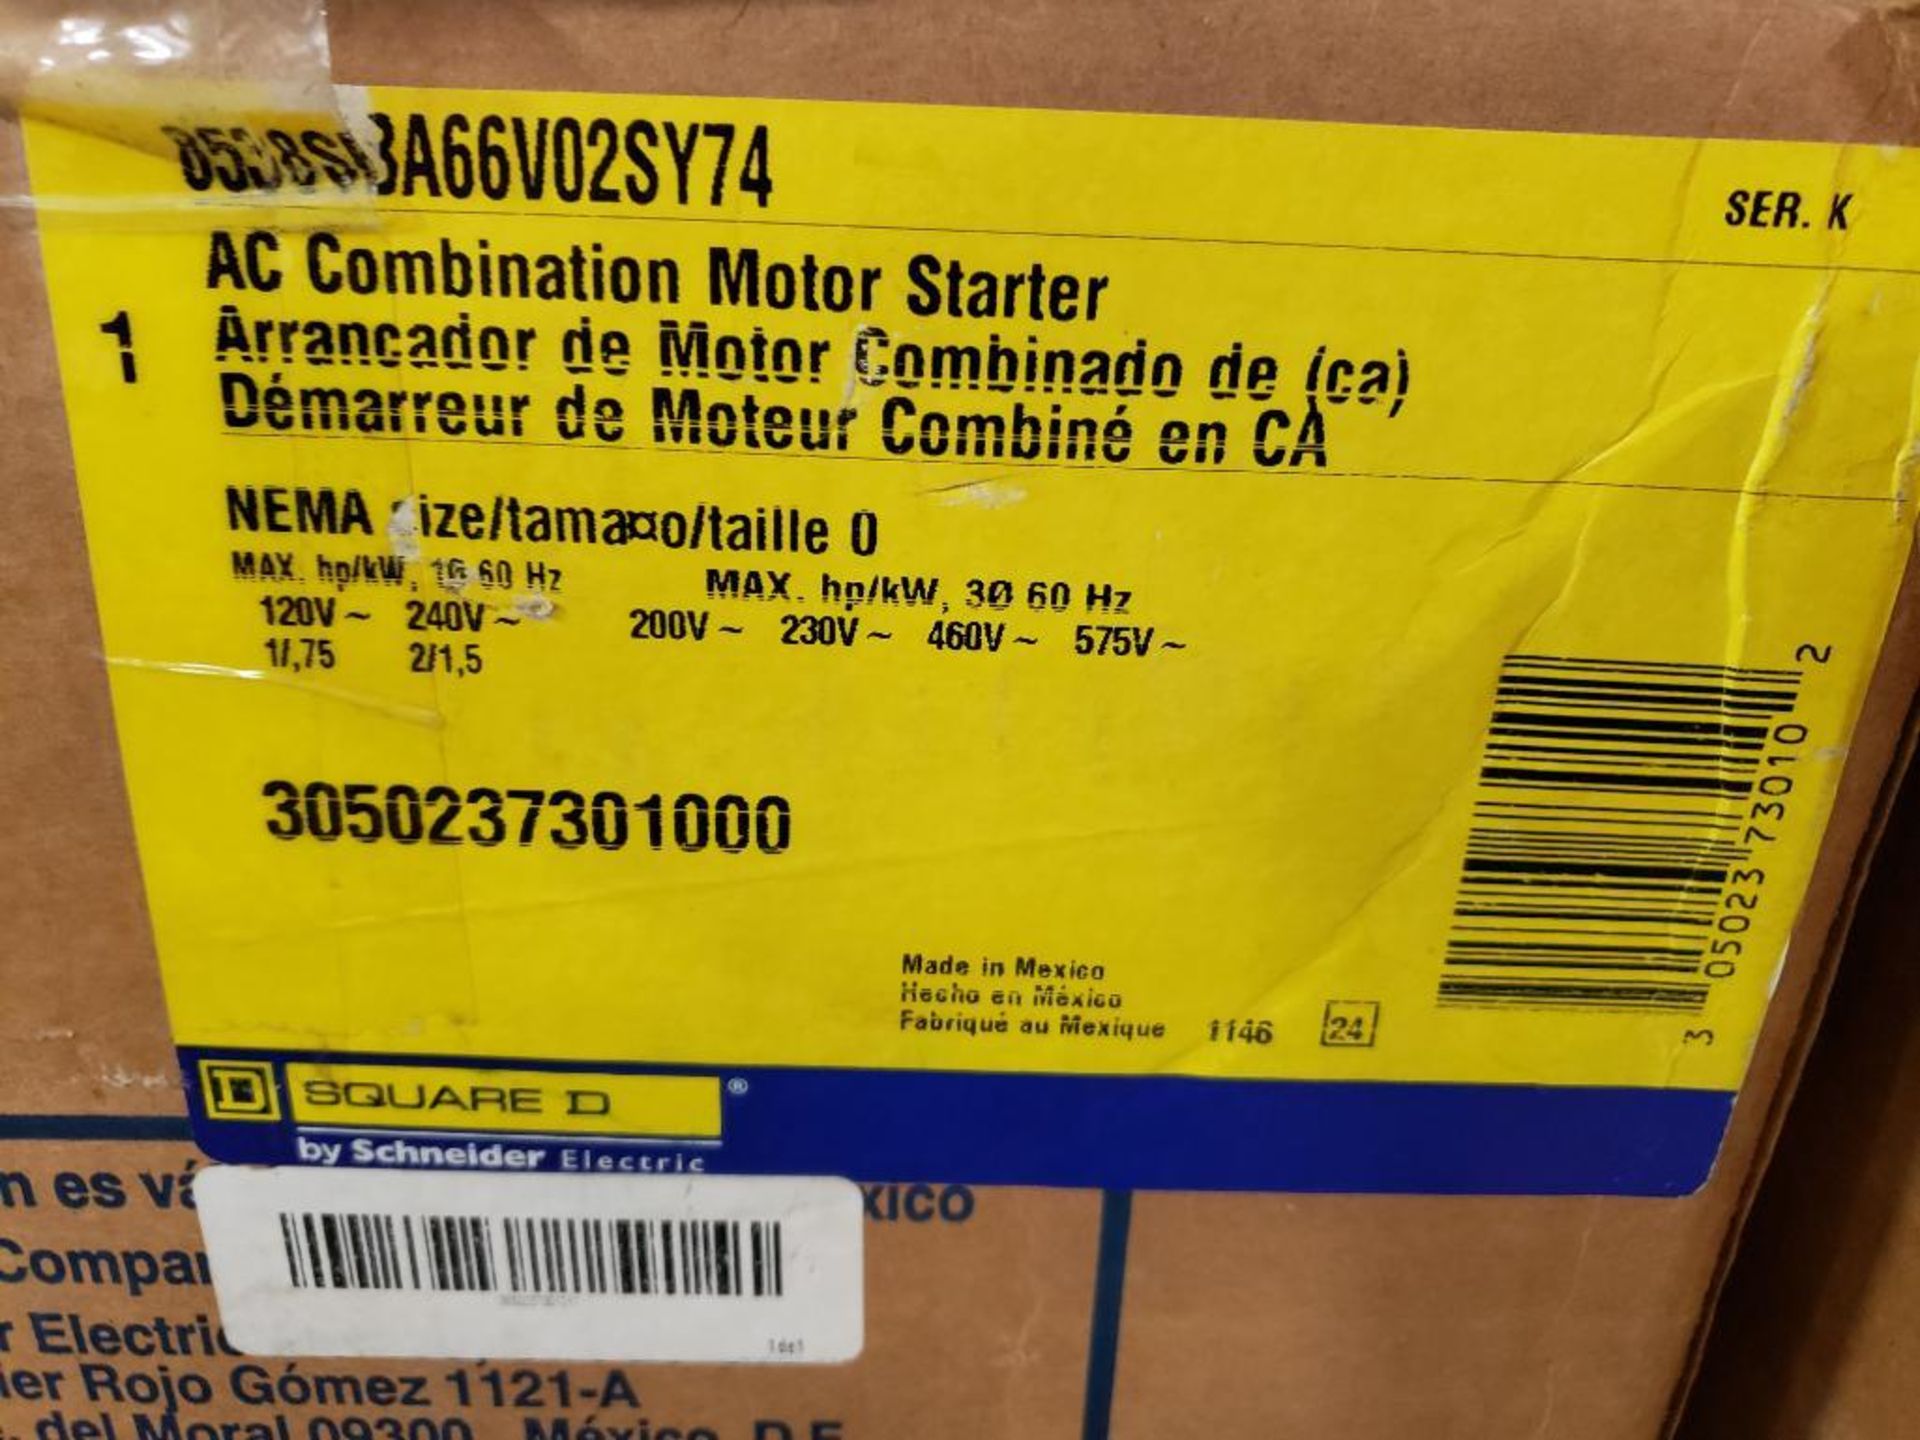 Square-D 8538SBA66V02SY74 AC Combination motor starter. New in box. - Image 2 of 4